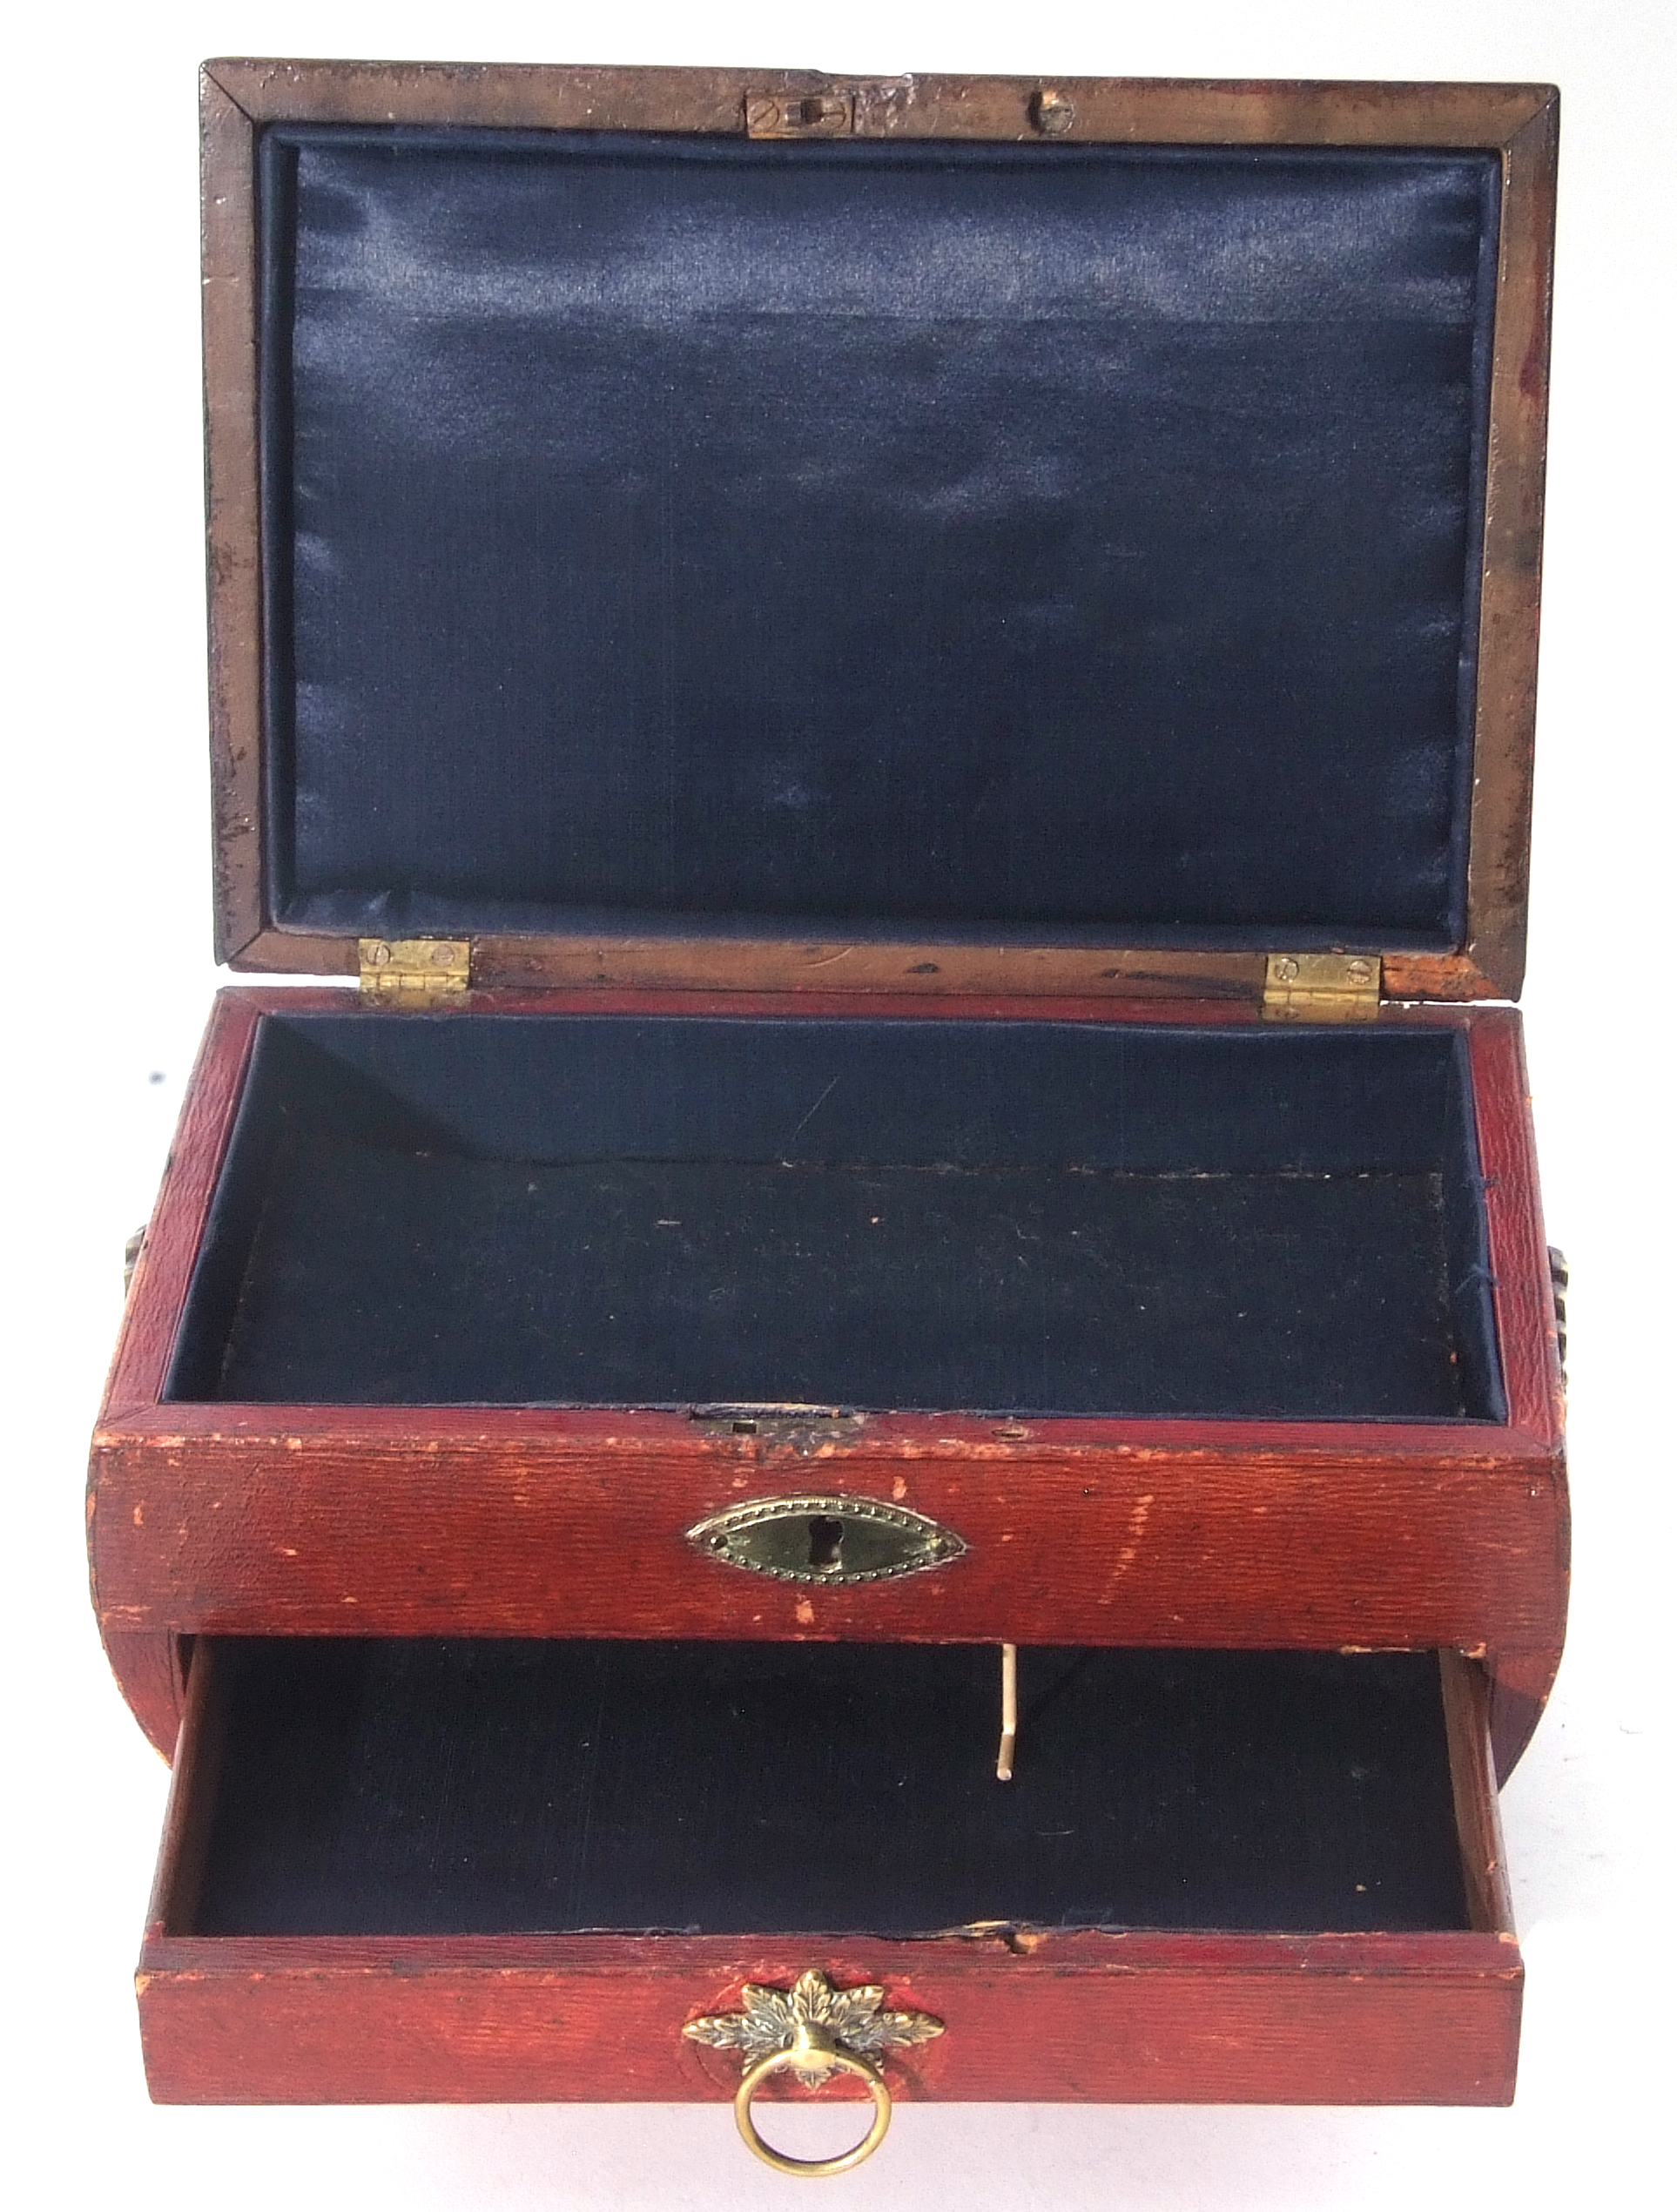 Regency red leather and brass embossed jewel box, hinged lid with silk lined interior, single drawer - Image 11 of 11